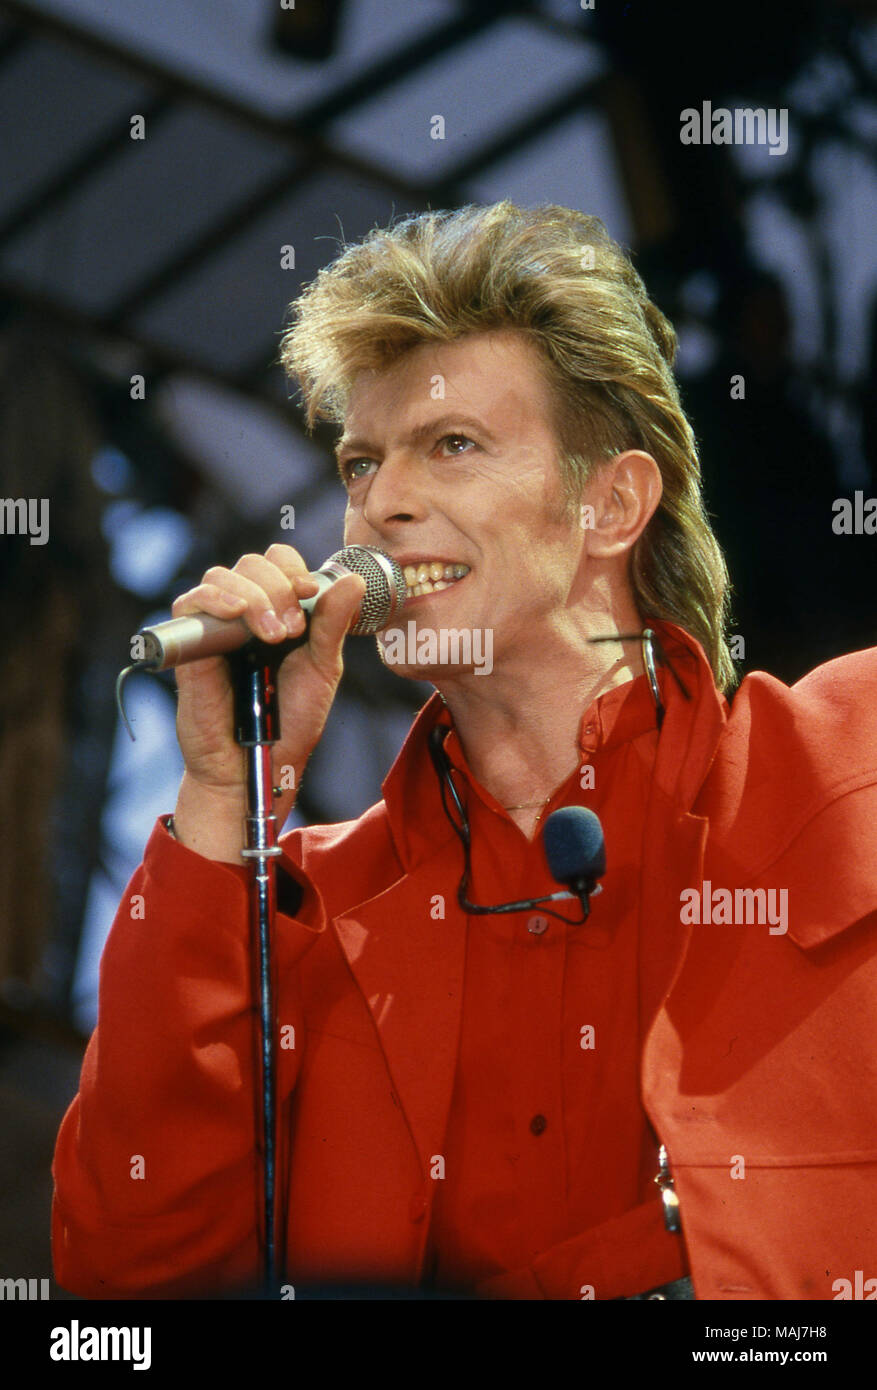 David Bowie at the Rotterdam Feyenoor Stadium performing on his Glass  Spider Tour 1987 Stock Photo - Alamy